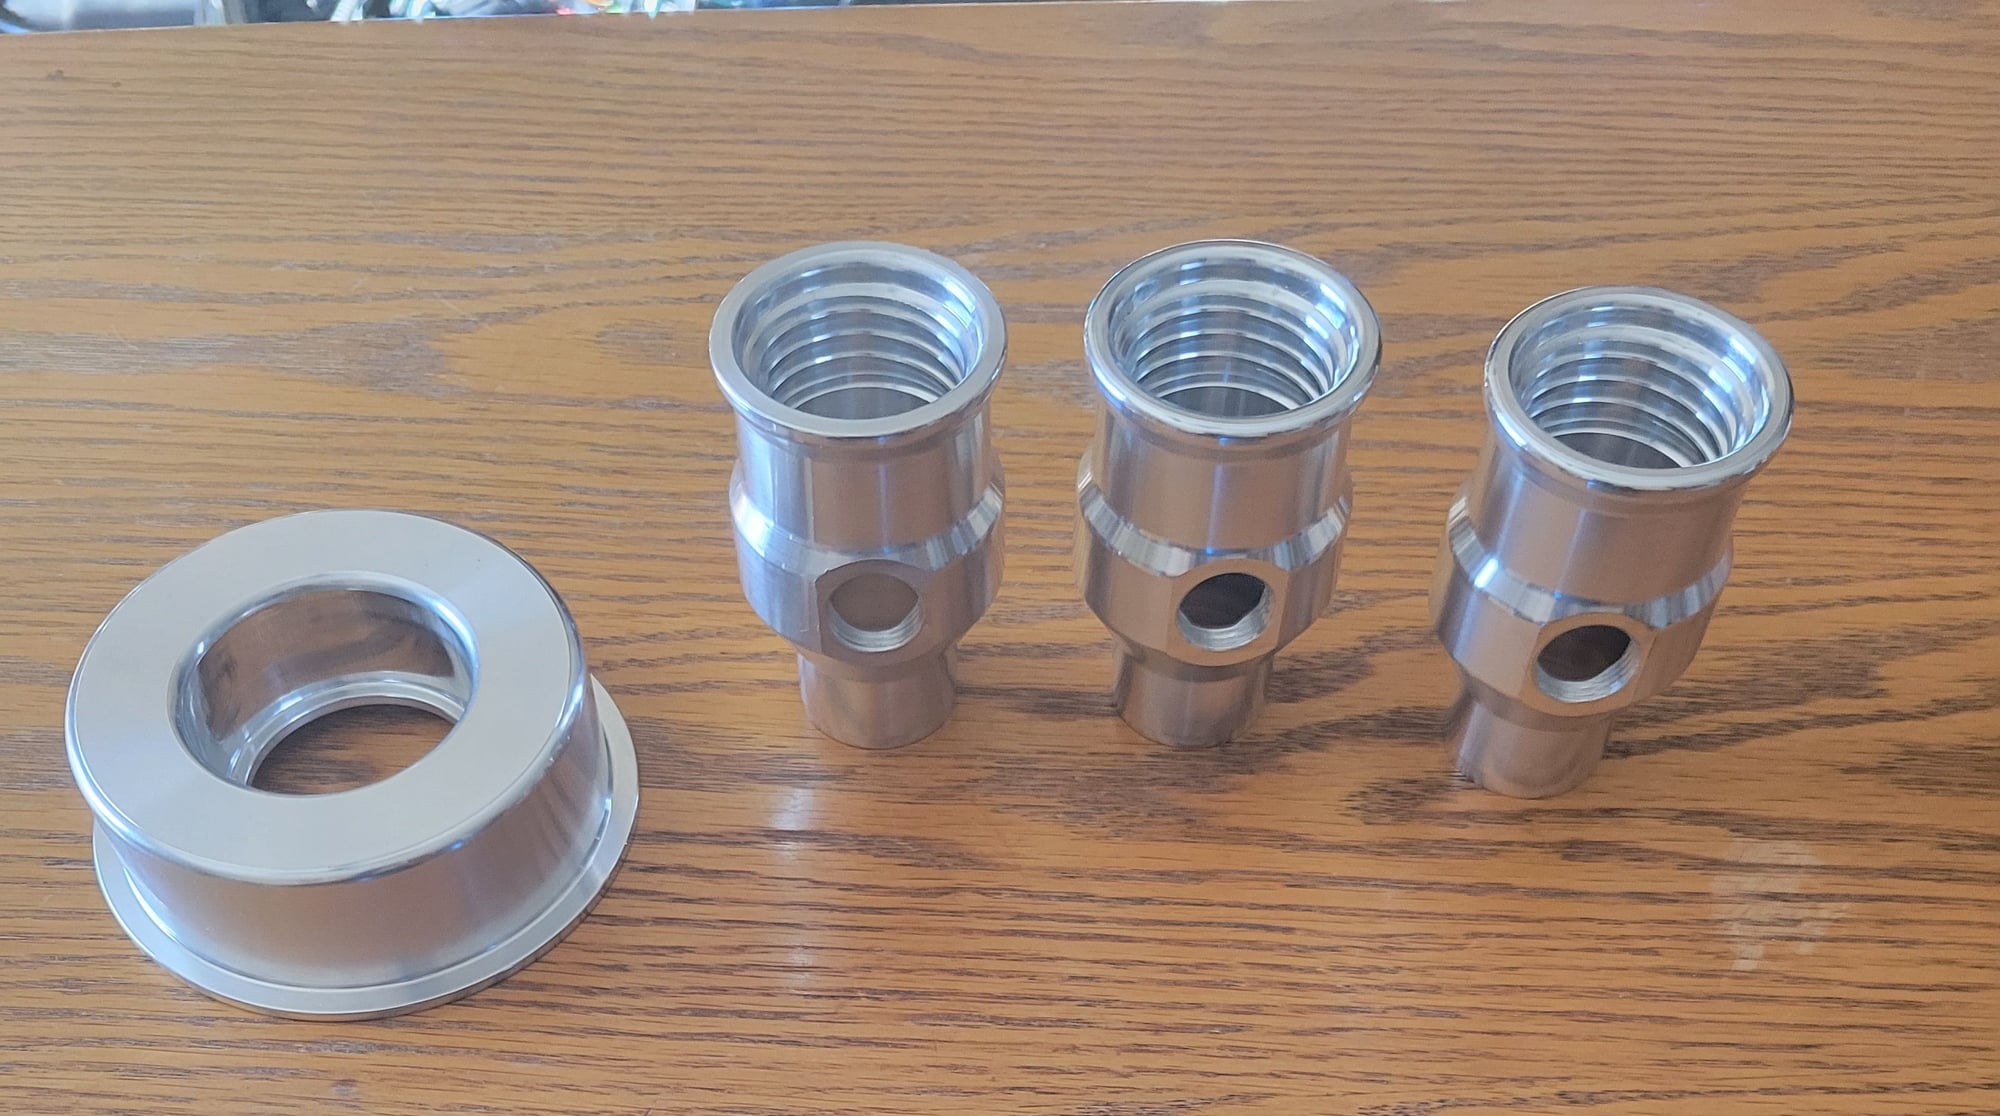 Miscellaneous - Custom Billet pulleys and fillers - New - 0  All Models - Muscatine, IA 52761, United States